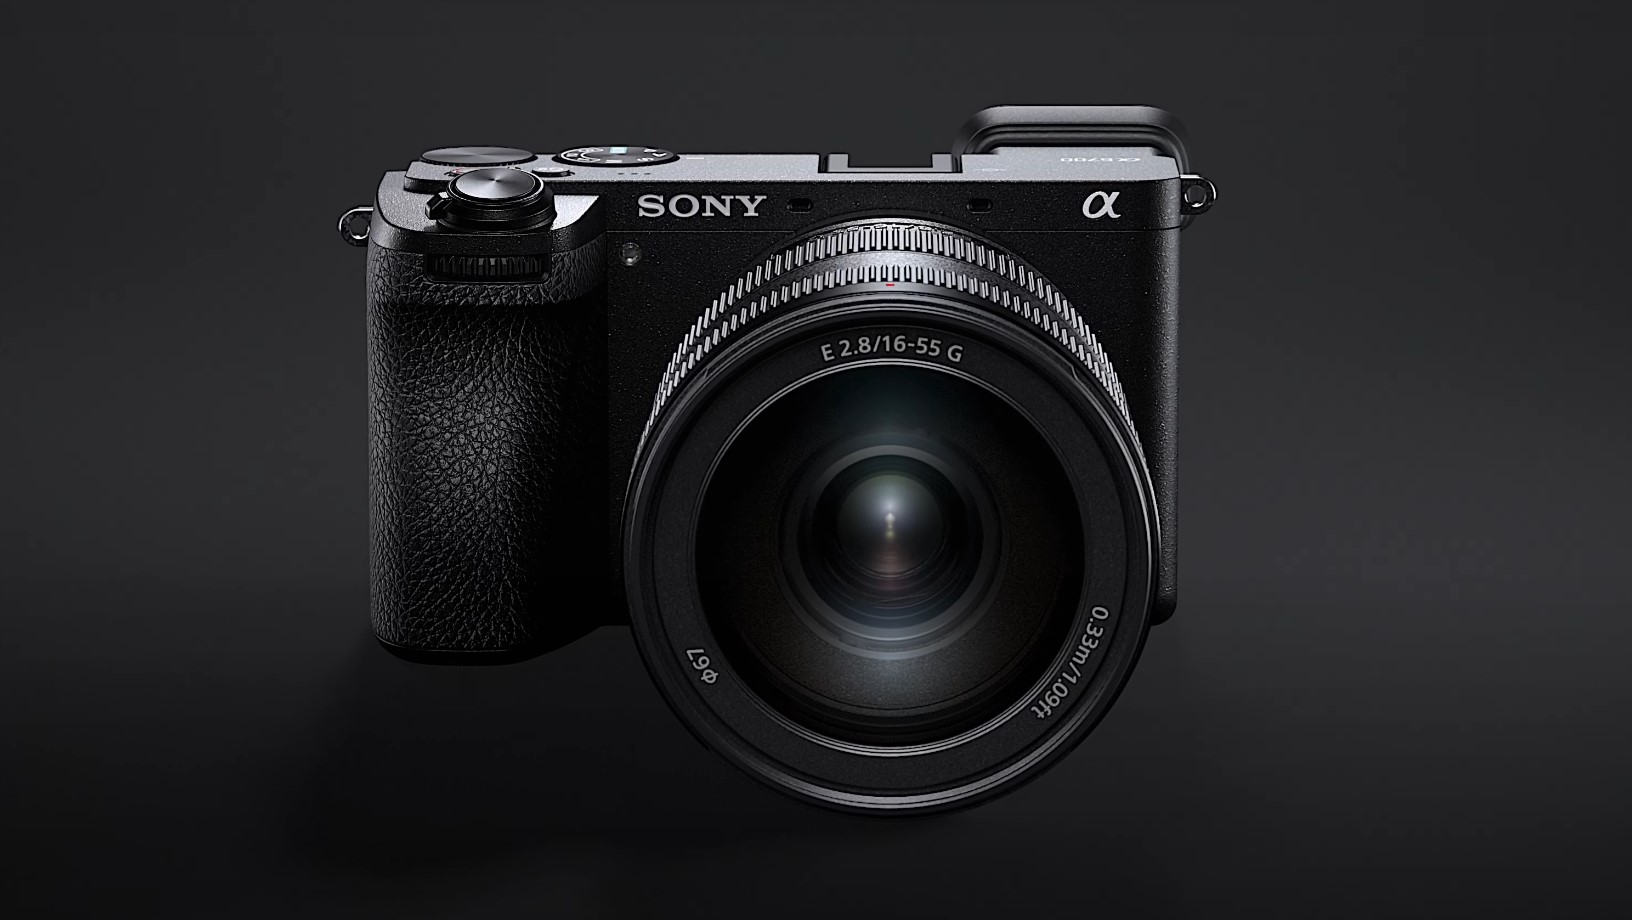 Image of Sony Alpha 6700 Camera on black background with lens